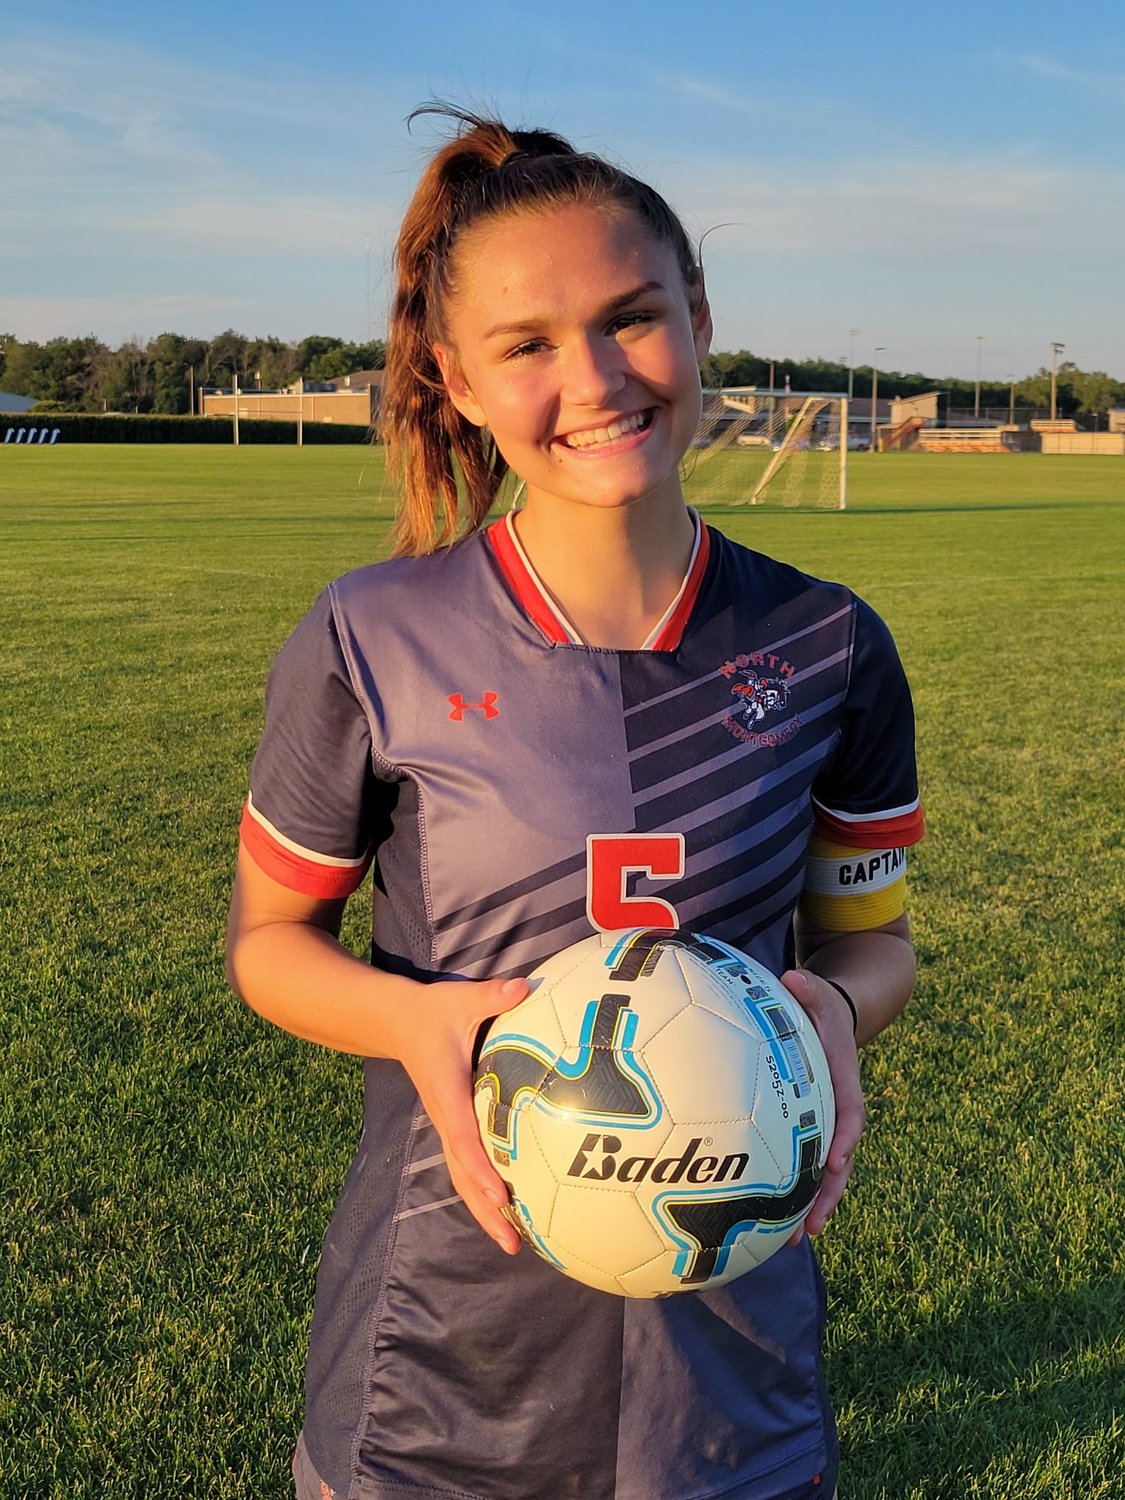 Teegan Bacon with the game ball after scoring her 69th career goal as she now holds the record for most career goals in North Montgomery girls soccer history.